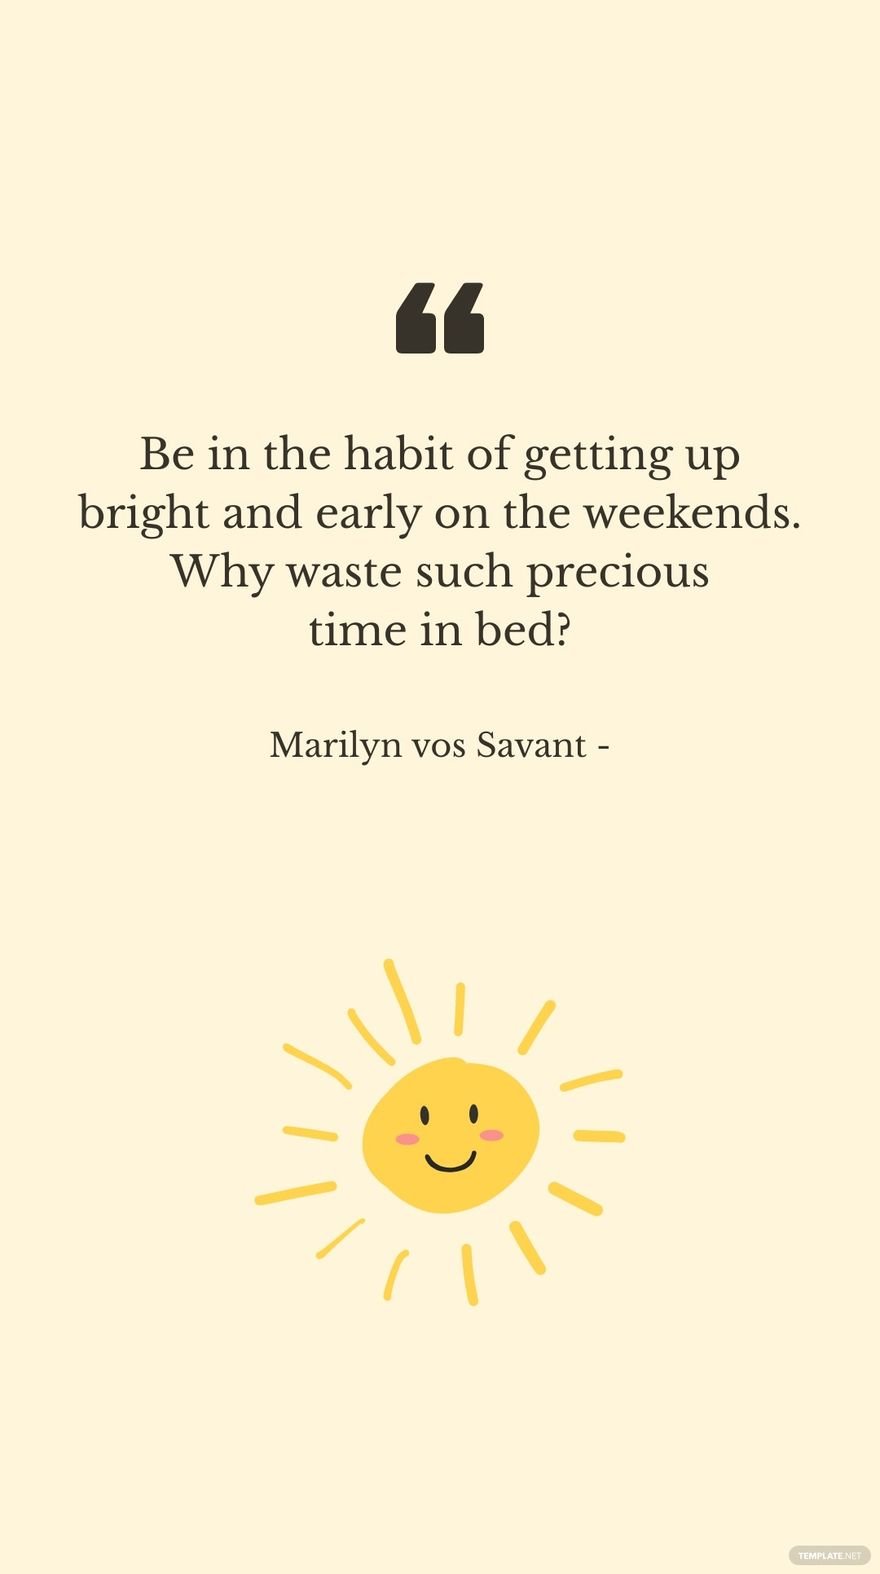 Marilyn vos Savant - Be in the habit of getting up bright and early on the weekends. Why waste such precious time in bed?